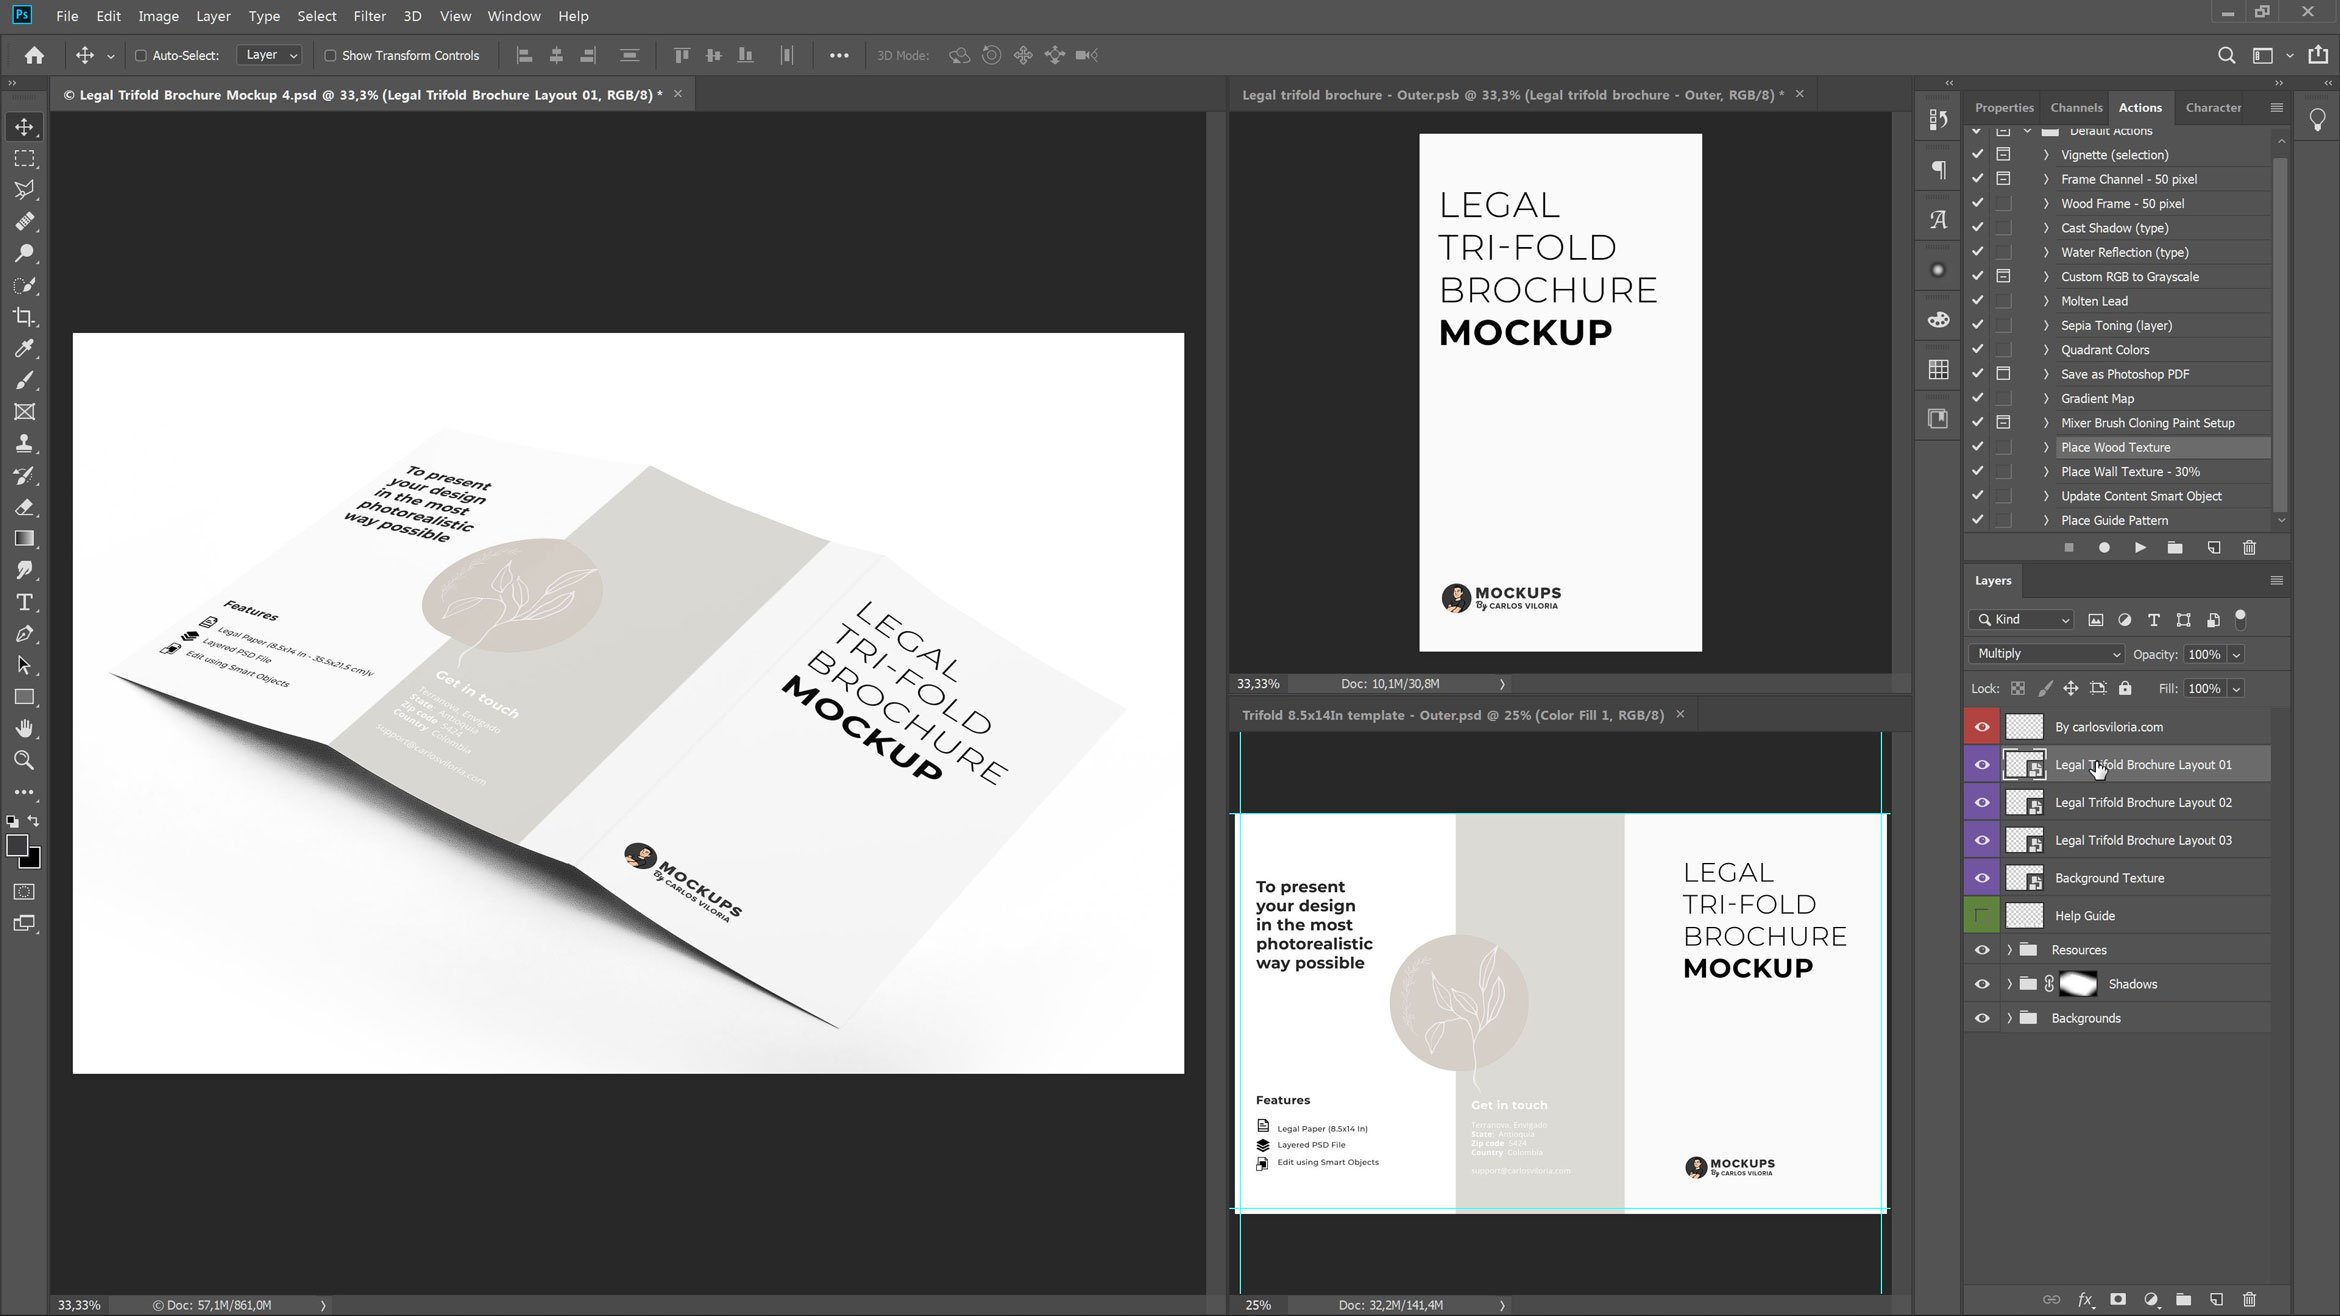 Legal Trifold Brochure Mockup – Open preview image.